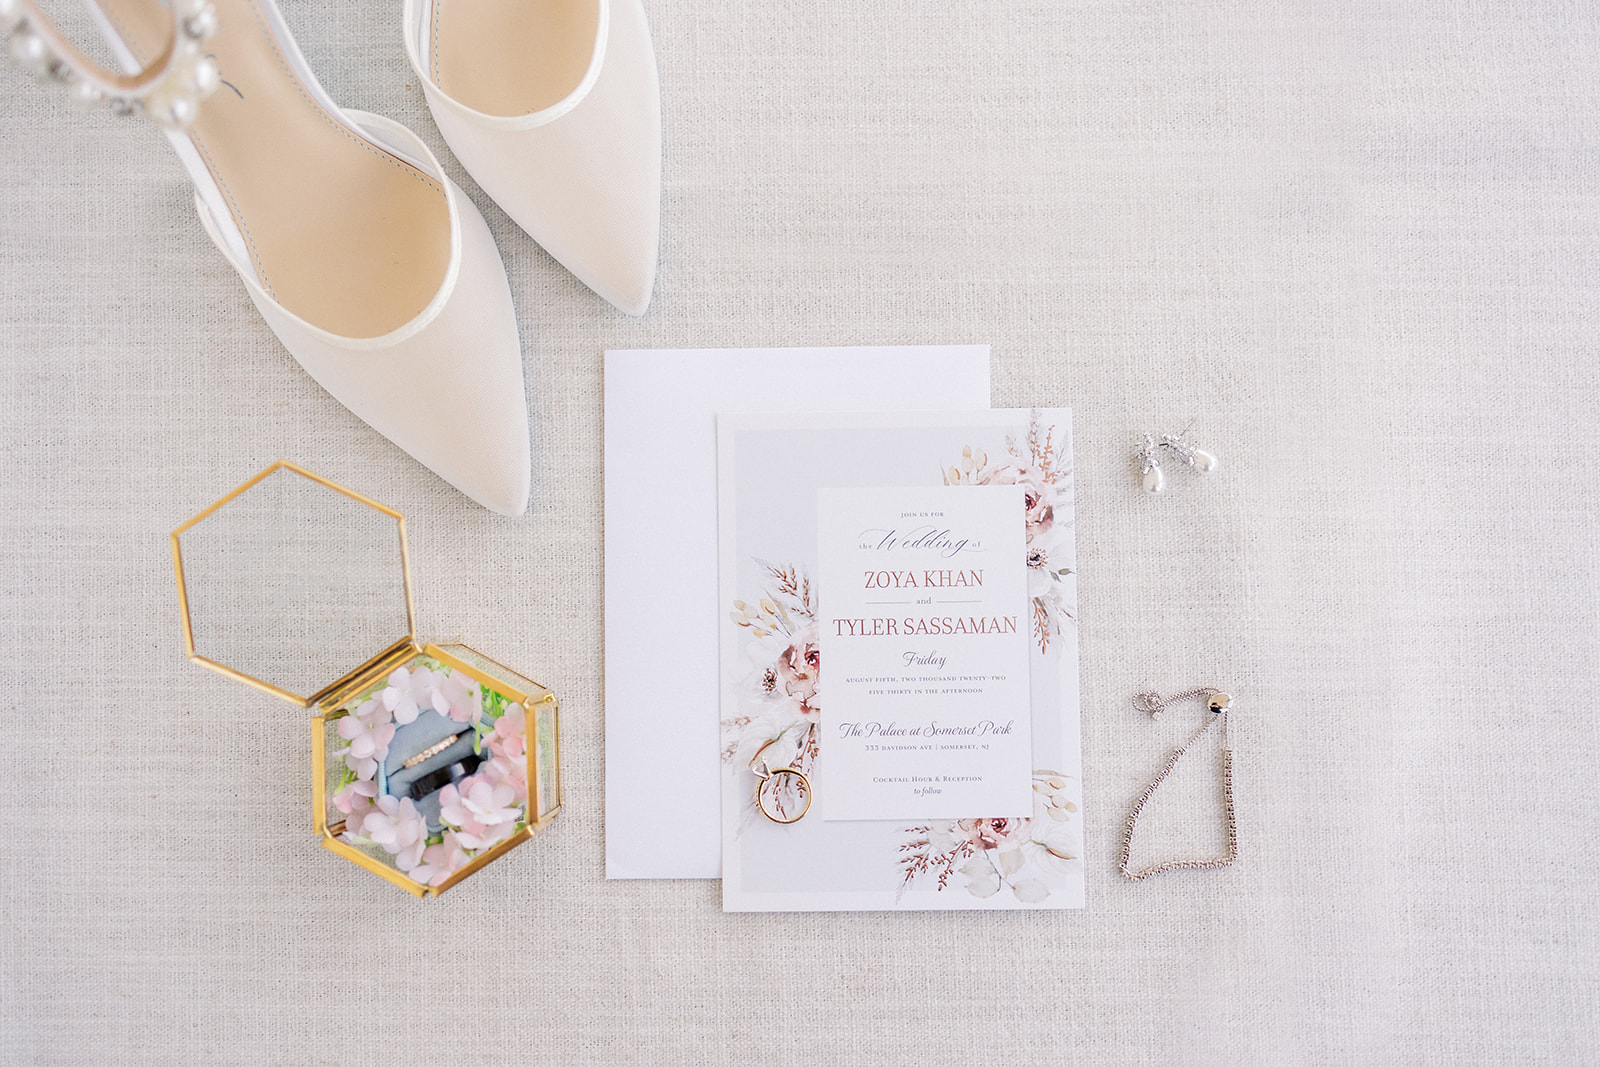 Details of a bride's earrings, shoes and jewelry on a white mat